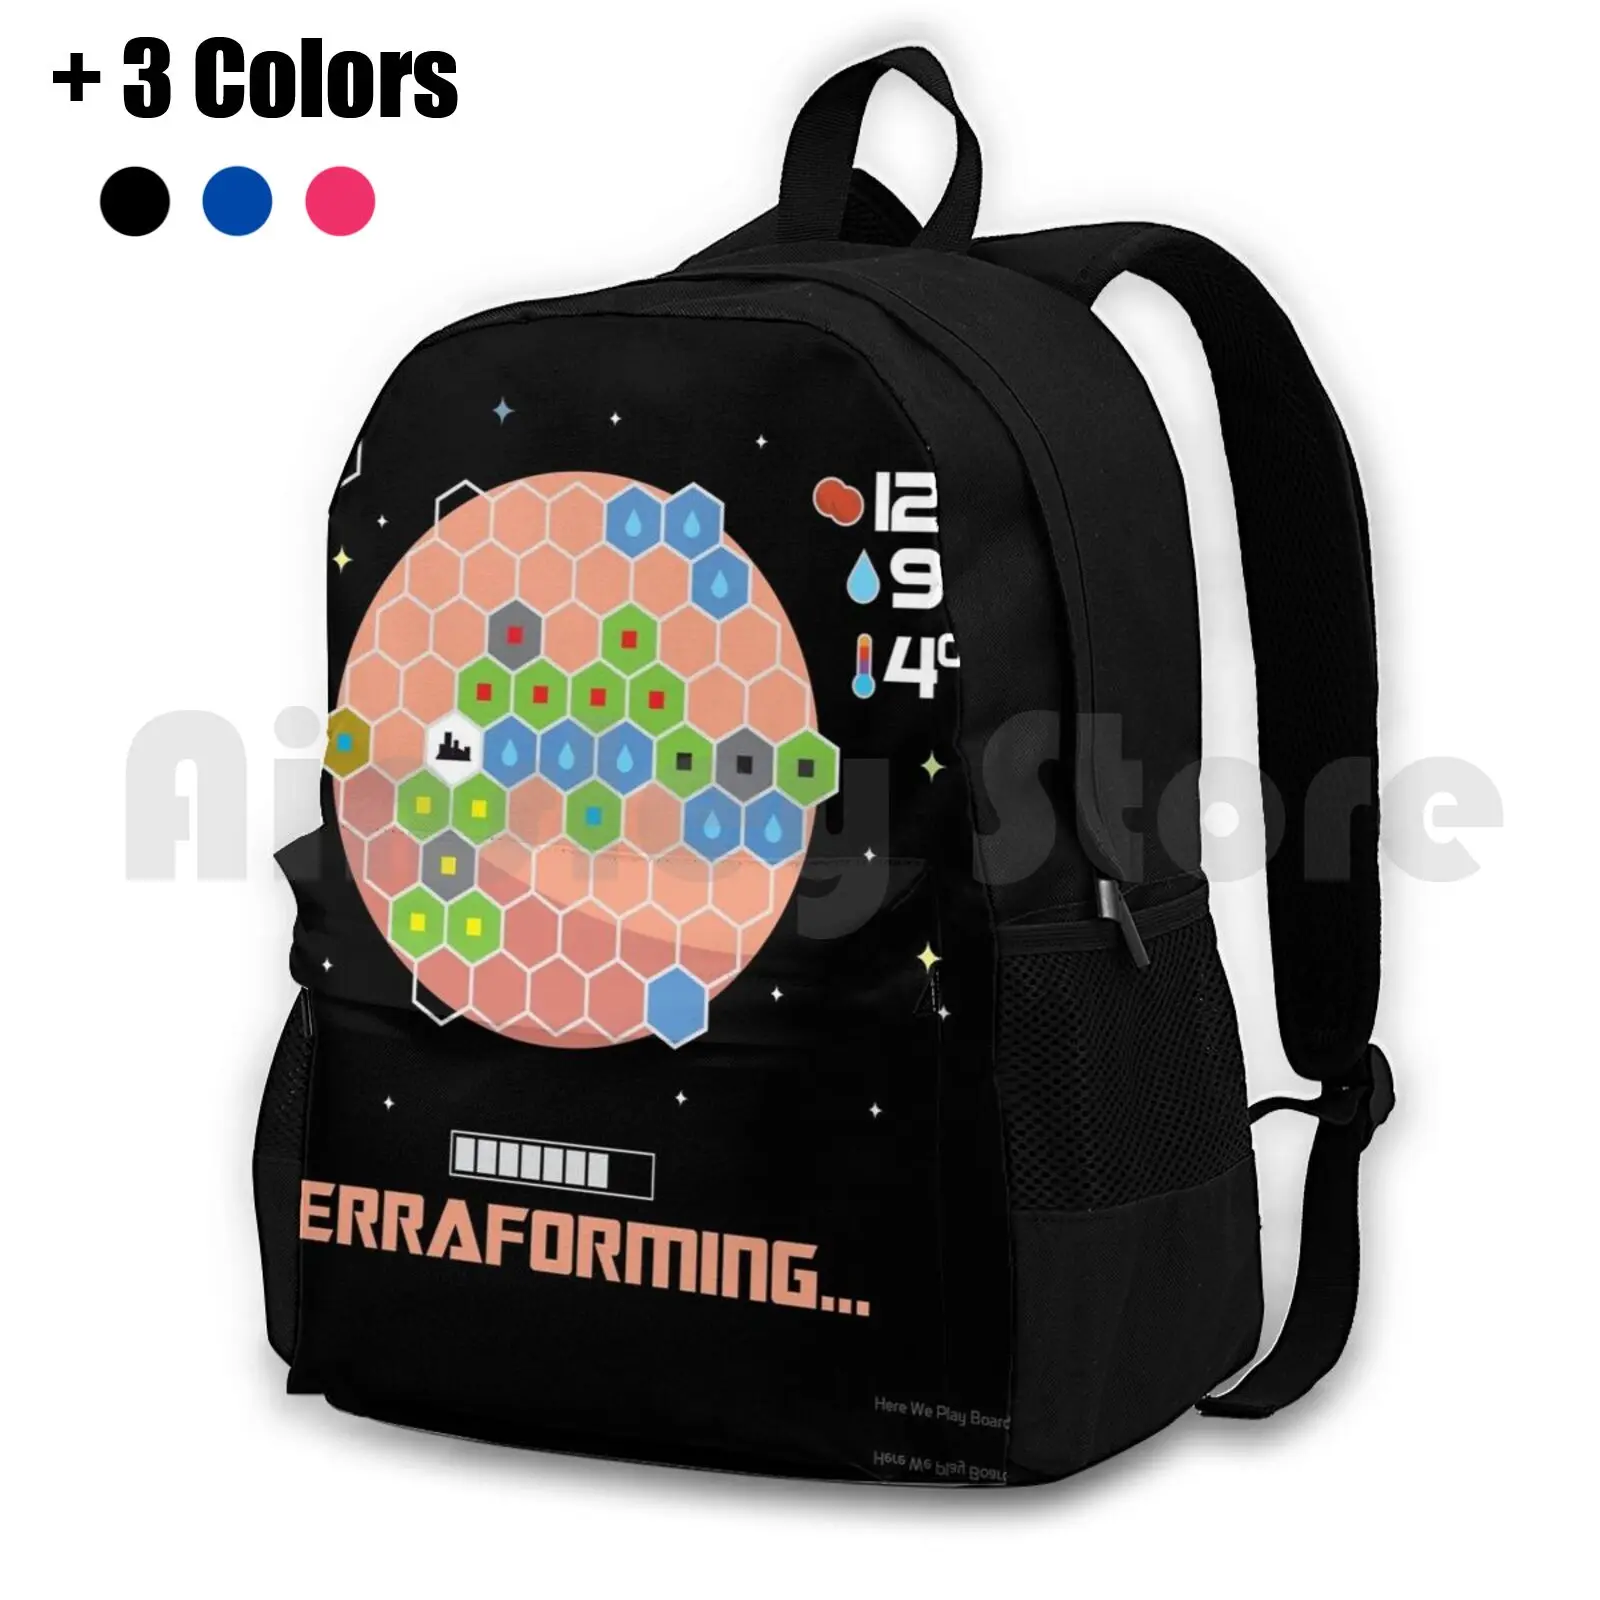 

Loading Mars... Outdoor Hiking Backpack Riding Climbing Sports Bag Games Game Board Boardgame Catan Carcassonne Terraforming